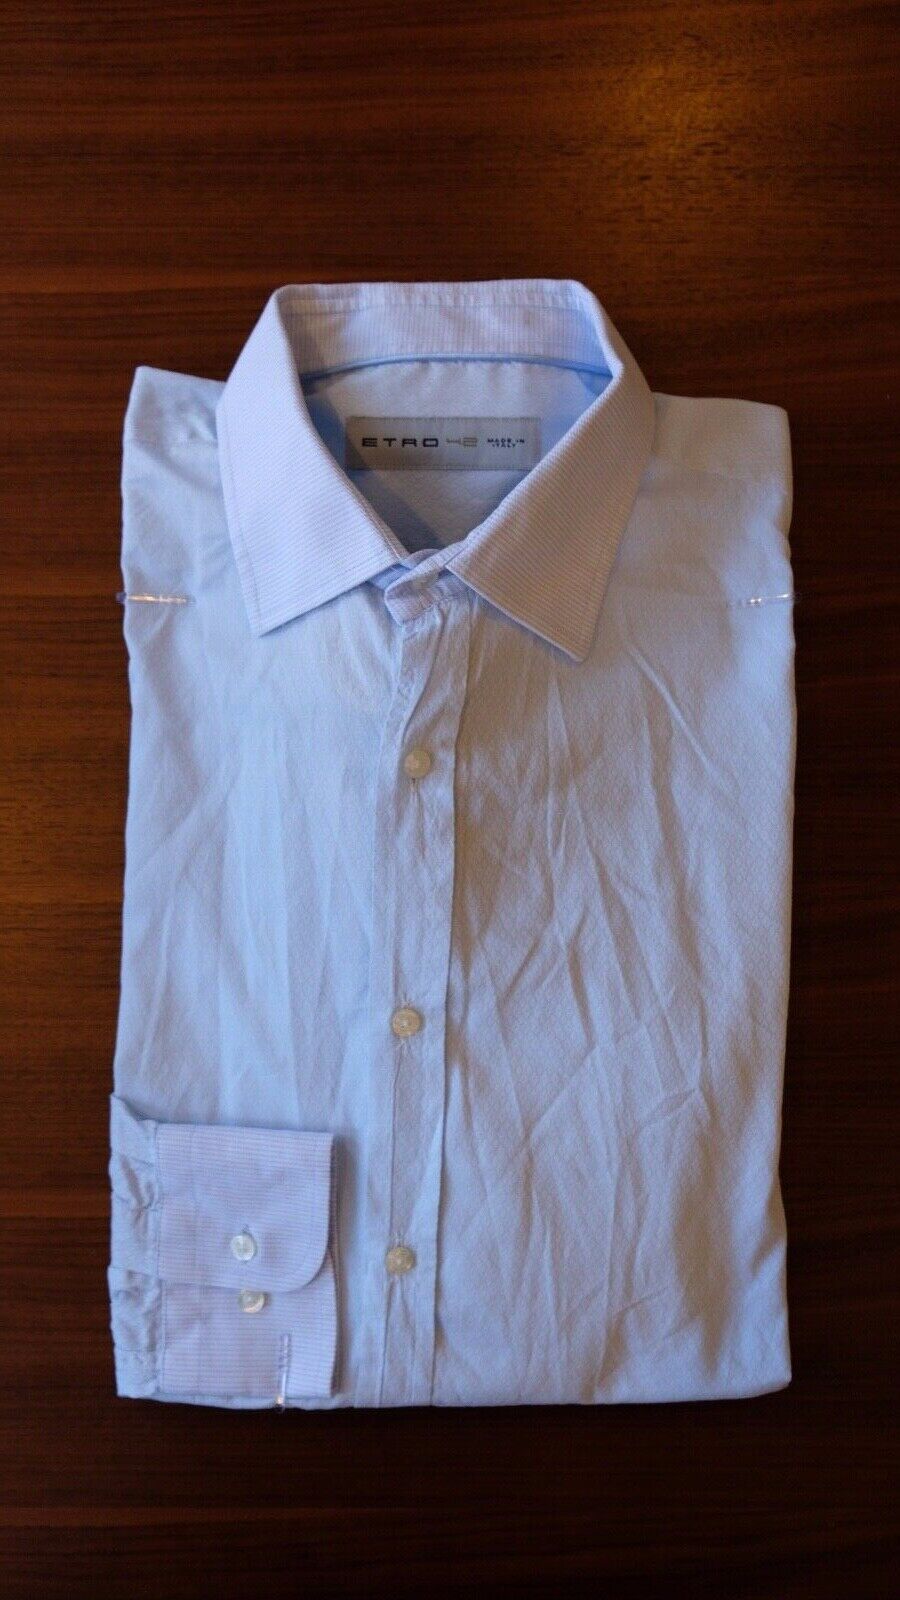 Etro Dress Shirt 16.5 Current Blue Cotton Point Collar - Made in Italy